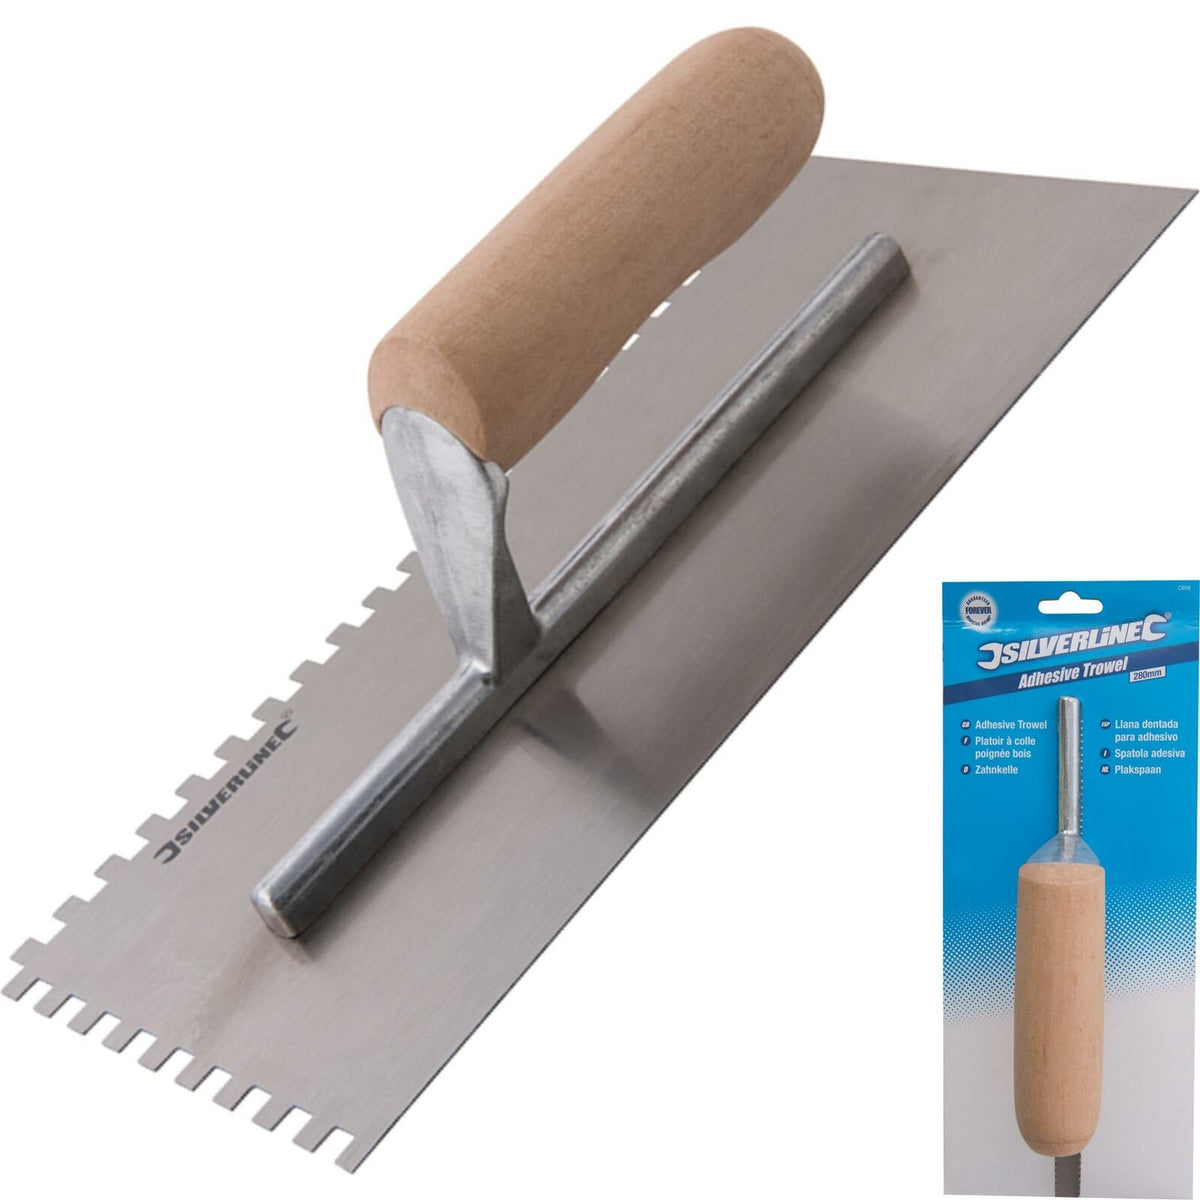 Silverline Adhesive Tile Tiling Notched Spreading Trowel Wooden Handle 6mm Teeth